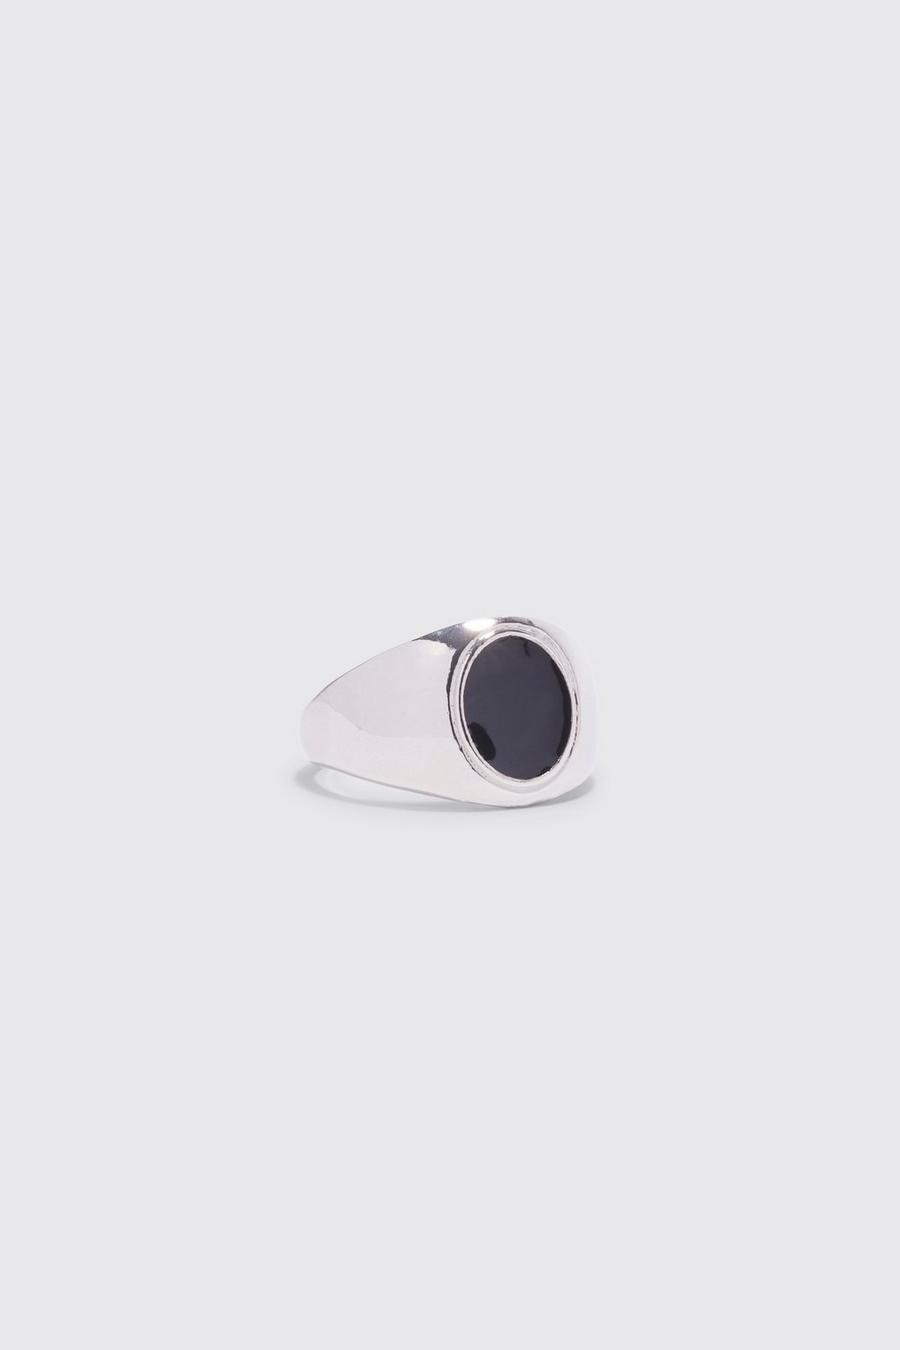 Silver argent Black Onyx Style Signet Ring